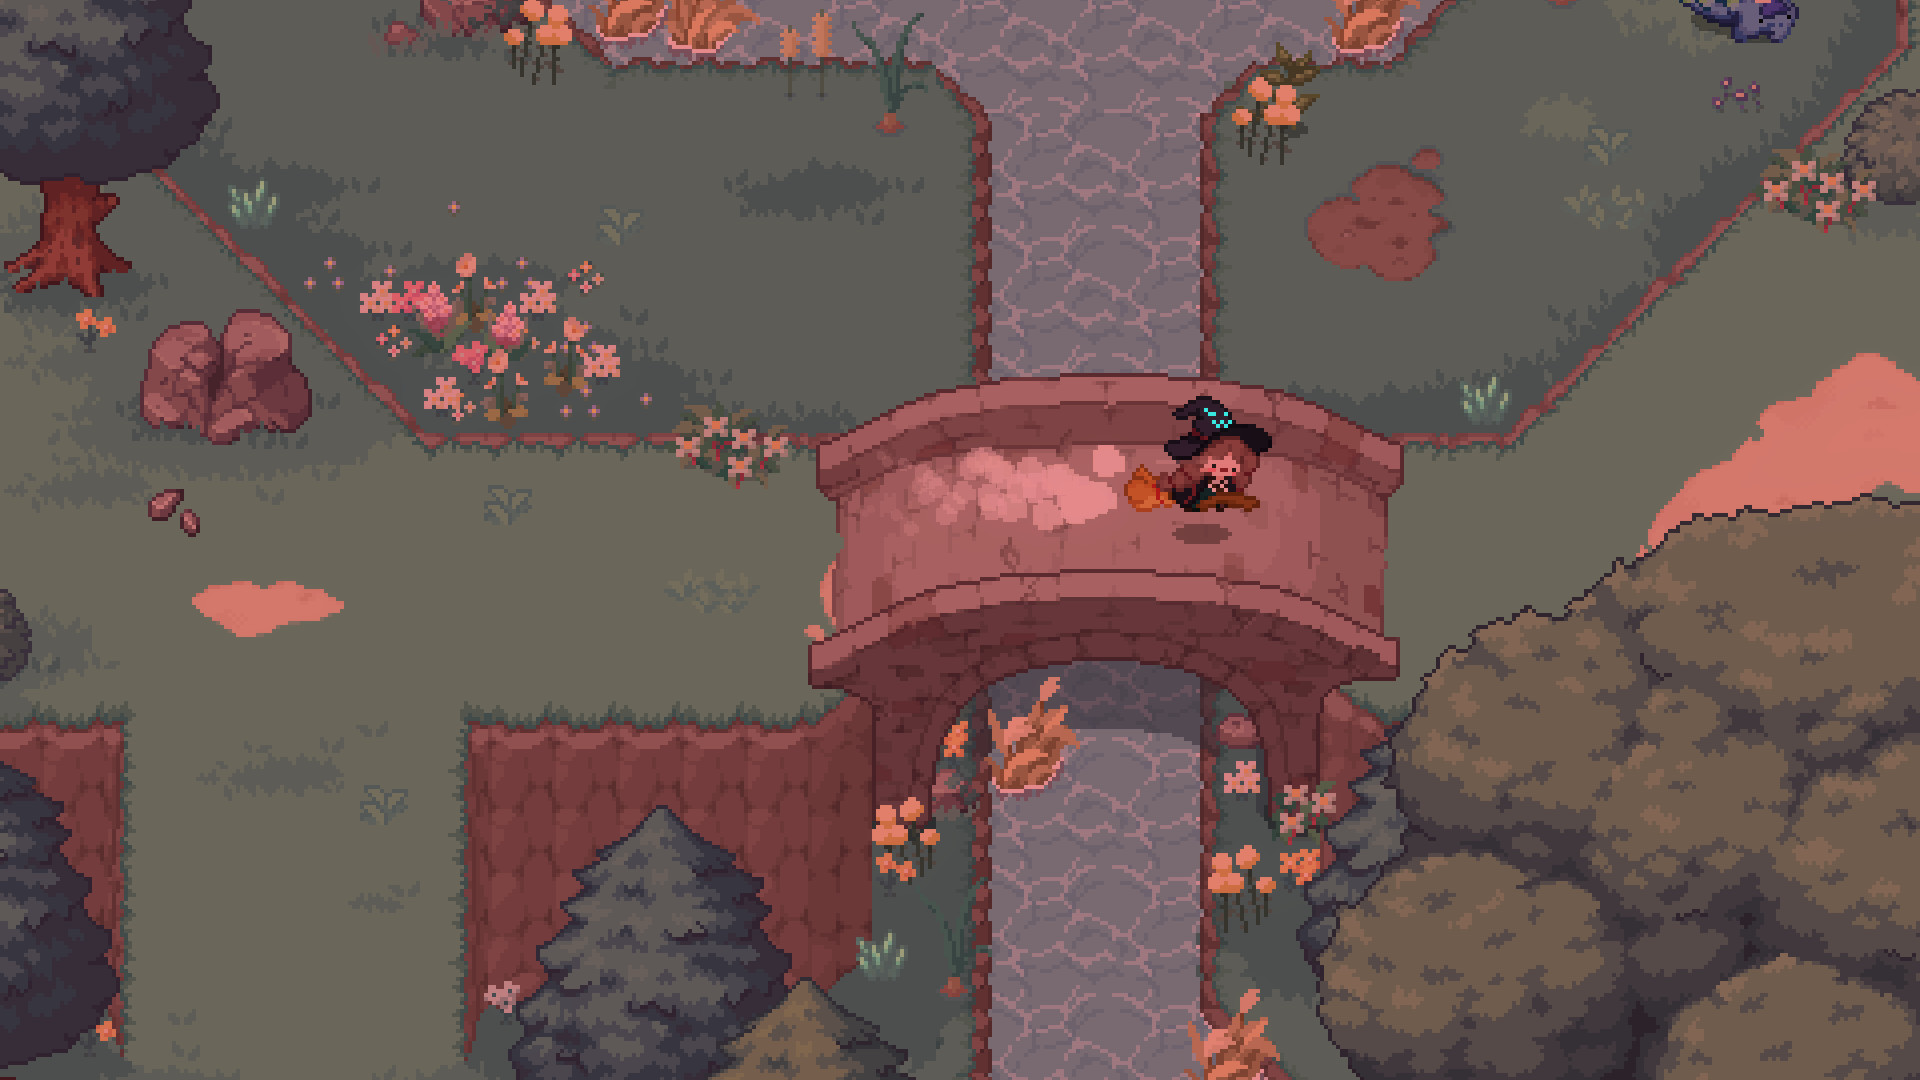 Using your broom in Little Witch in the Woods.